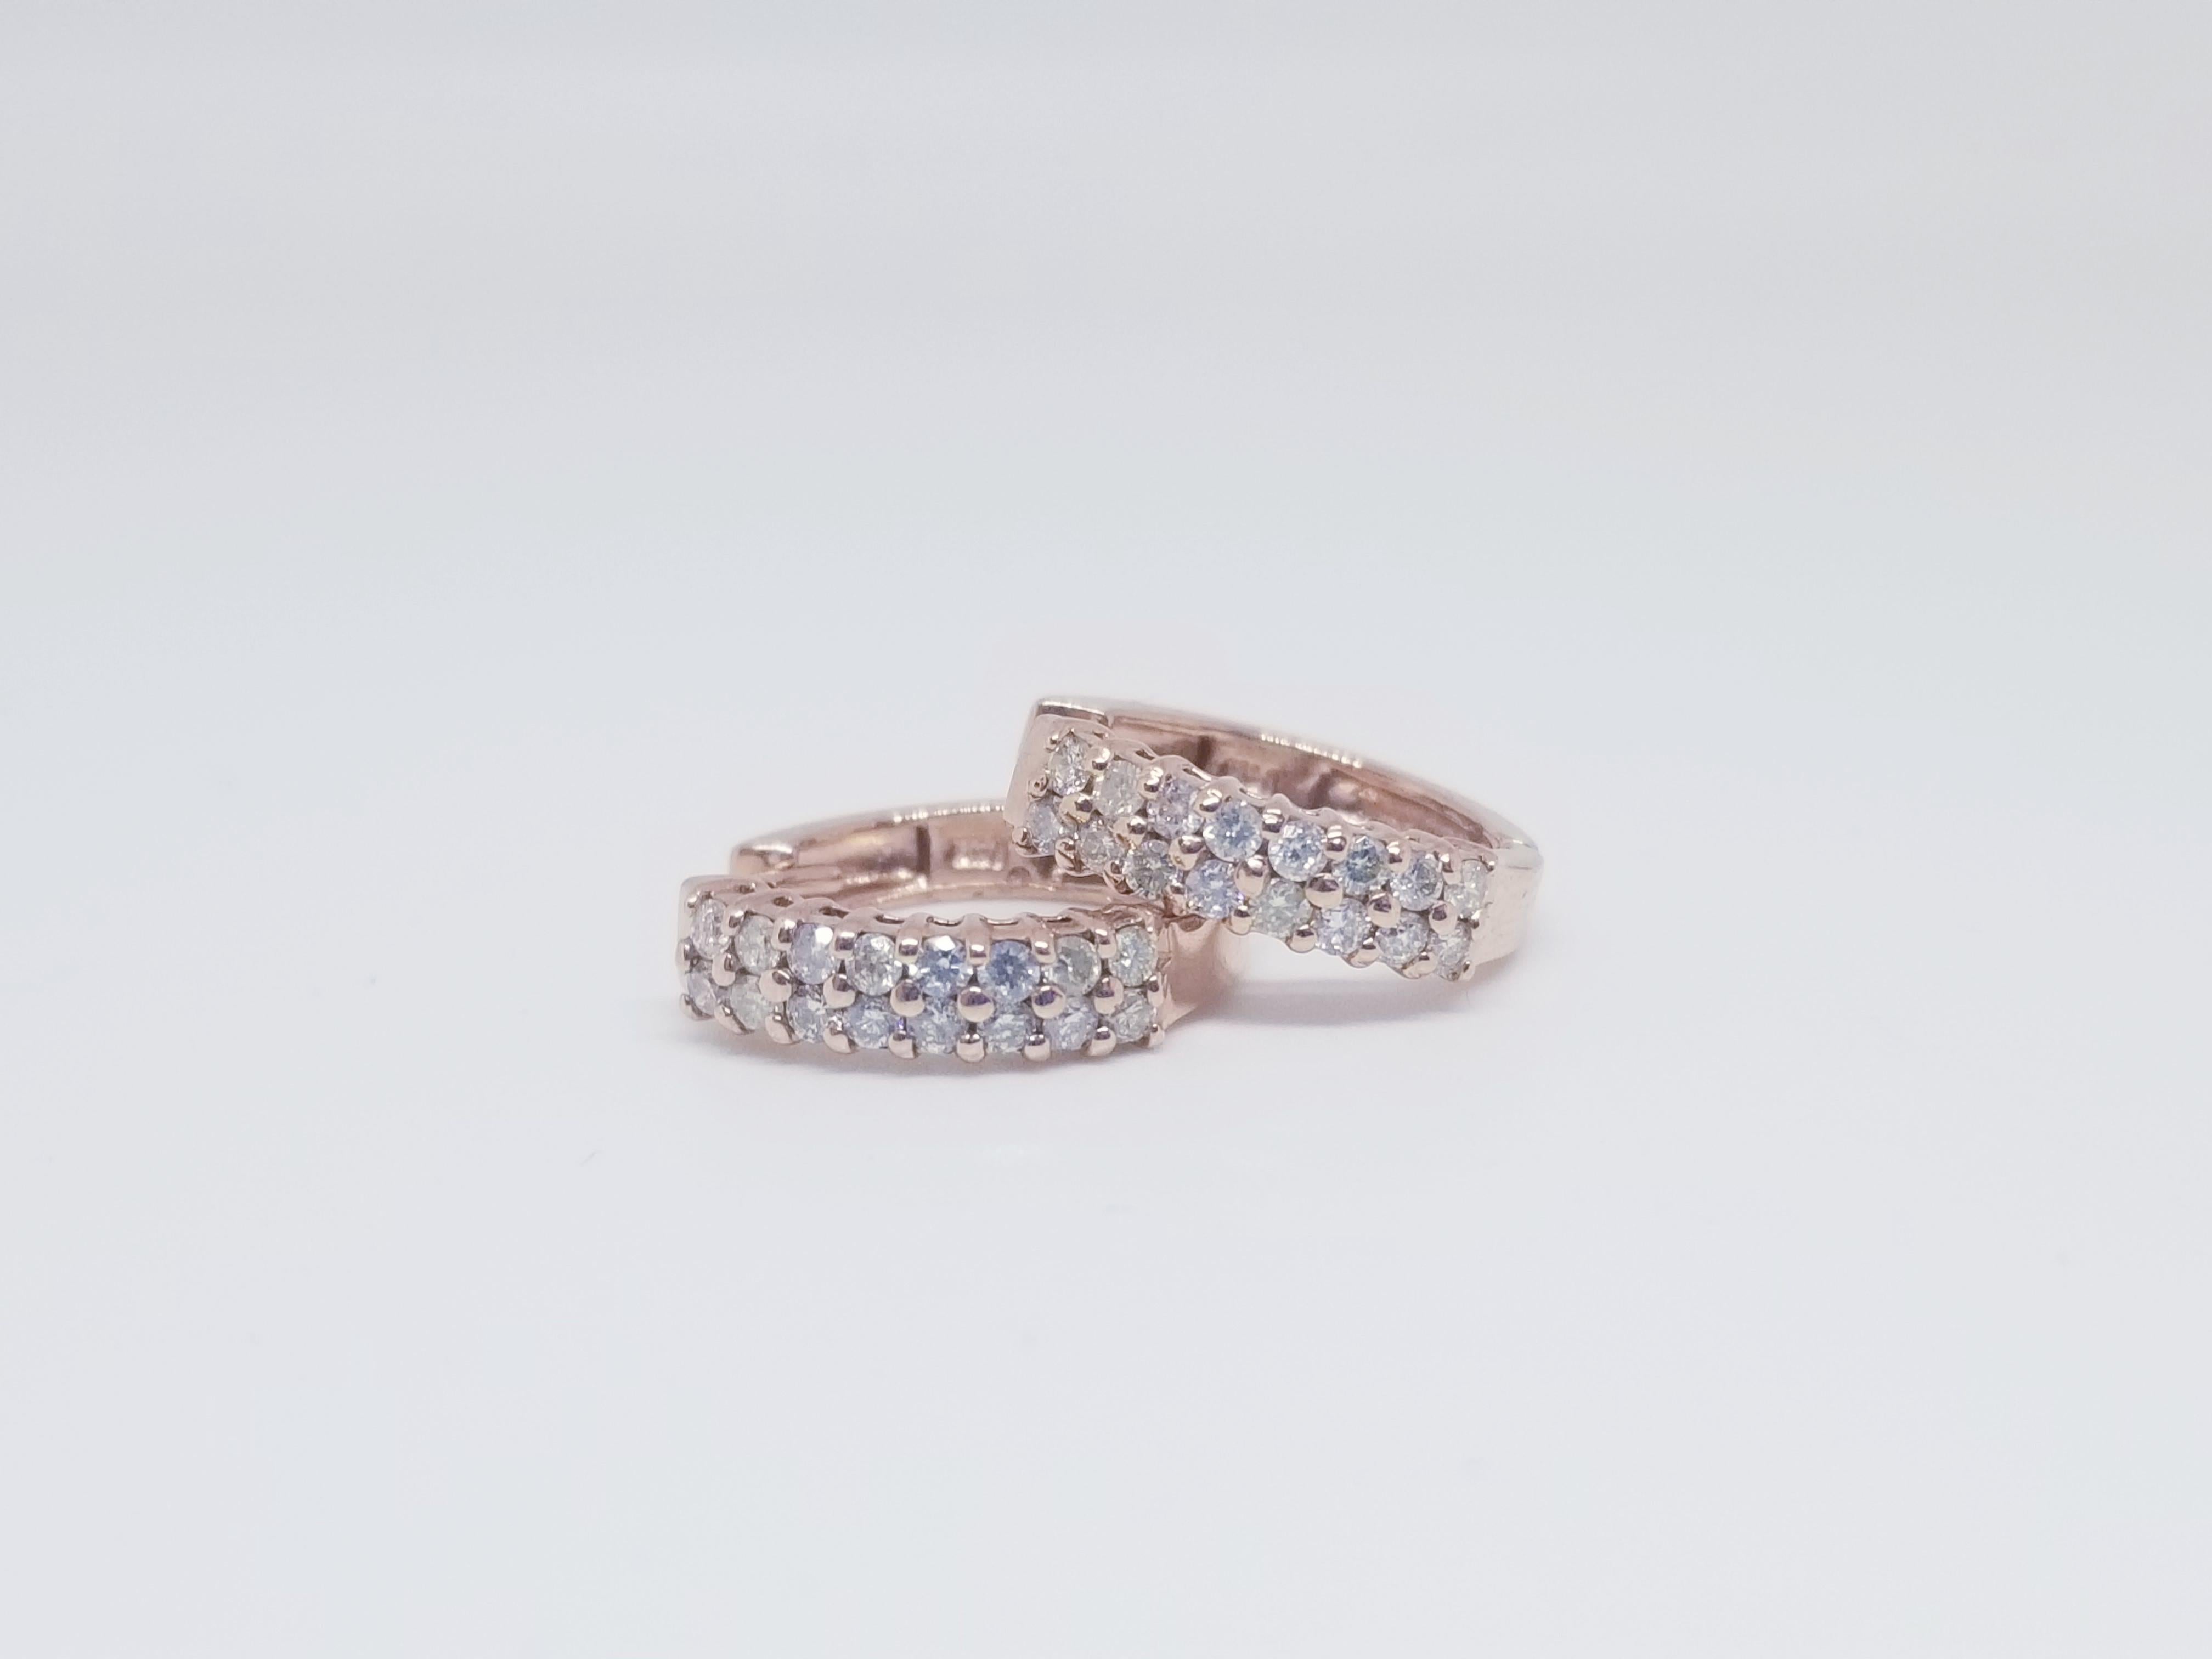 Beautiful shiny pair of huggie diamond hoop earrings in 14k rose gold. Double row design features 32 round diamonds that weight approximately 0.89cttw. Secure with snap closure. Measures 1.5 mm in diameter and weighs 3.24 grams.